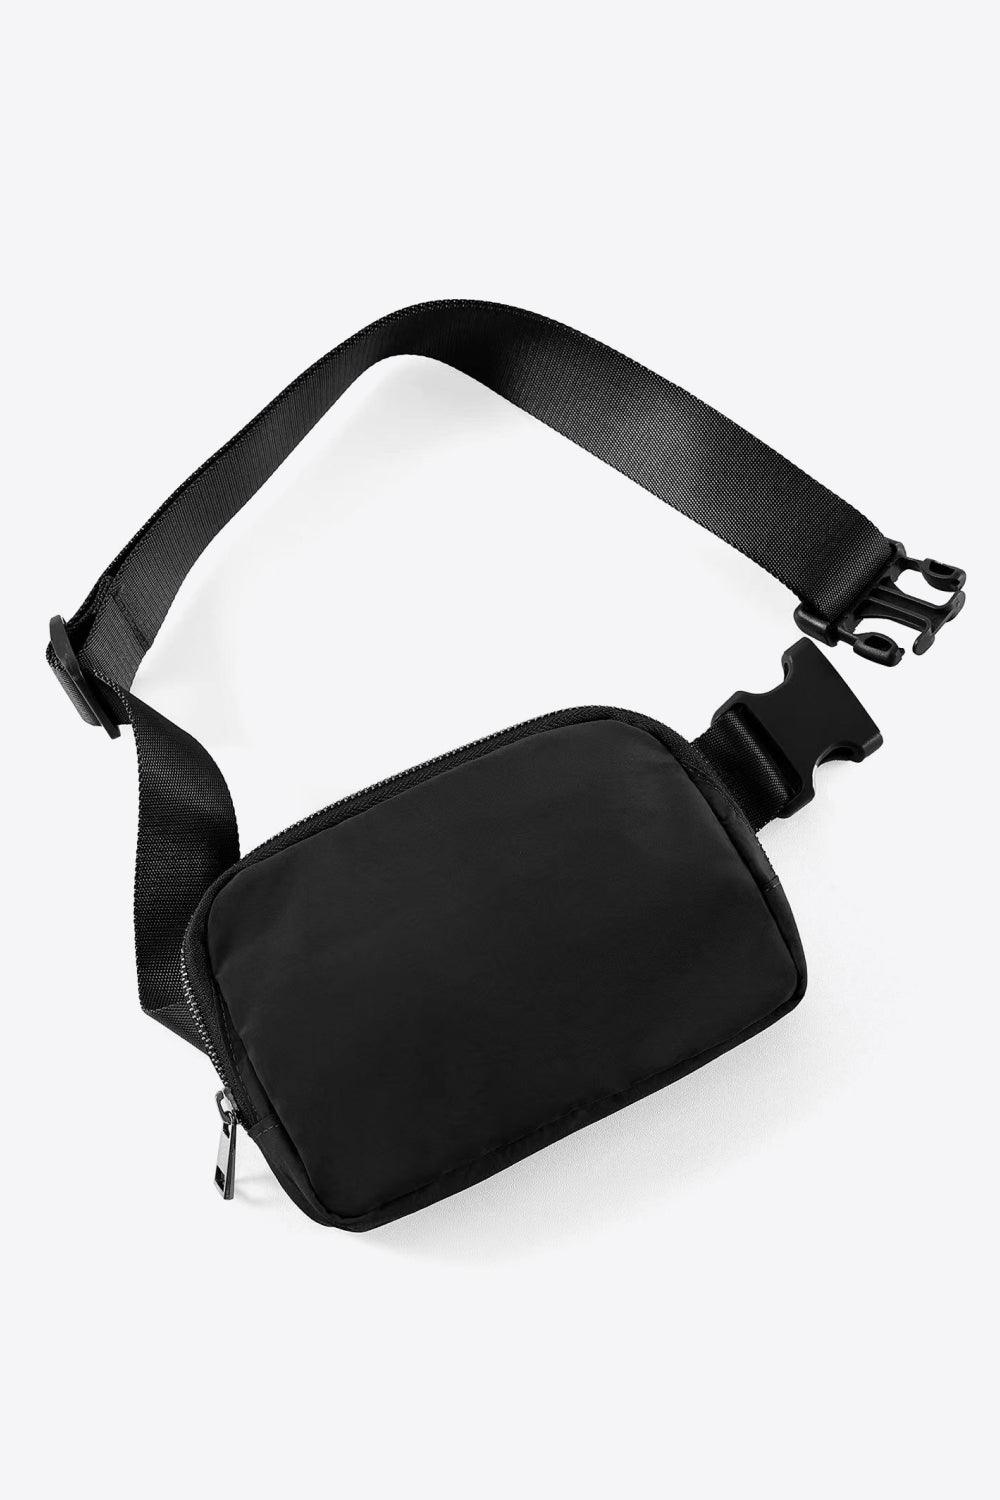 Buckle Zip Closure Fanny Pack: Ultimate Convenience & Style